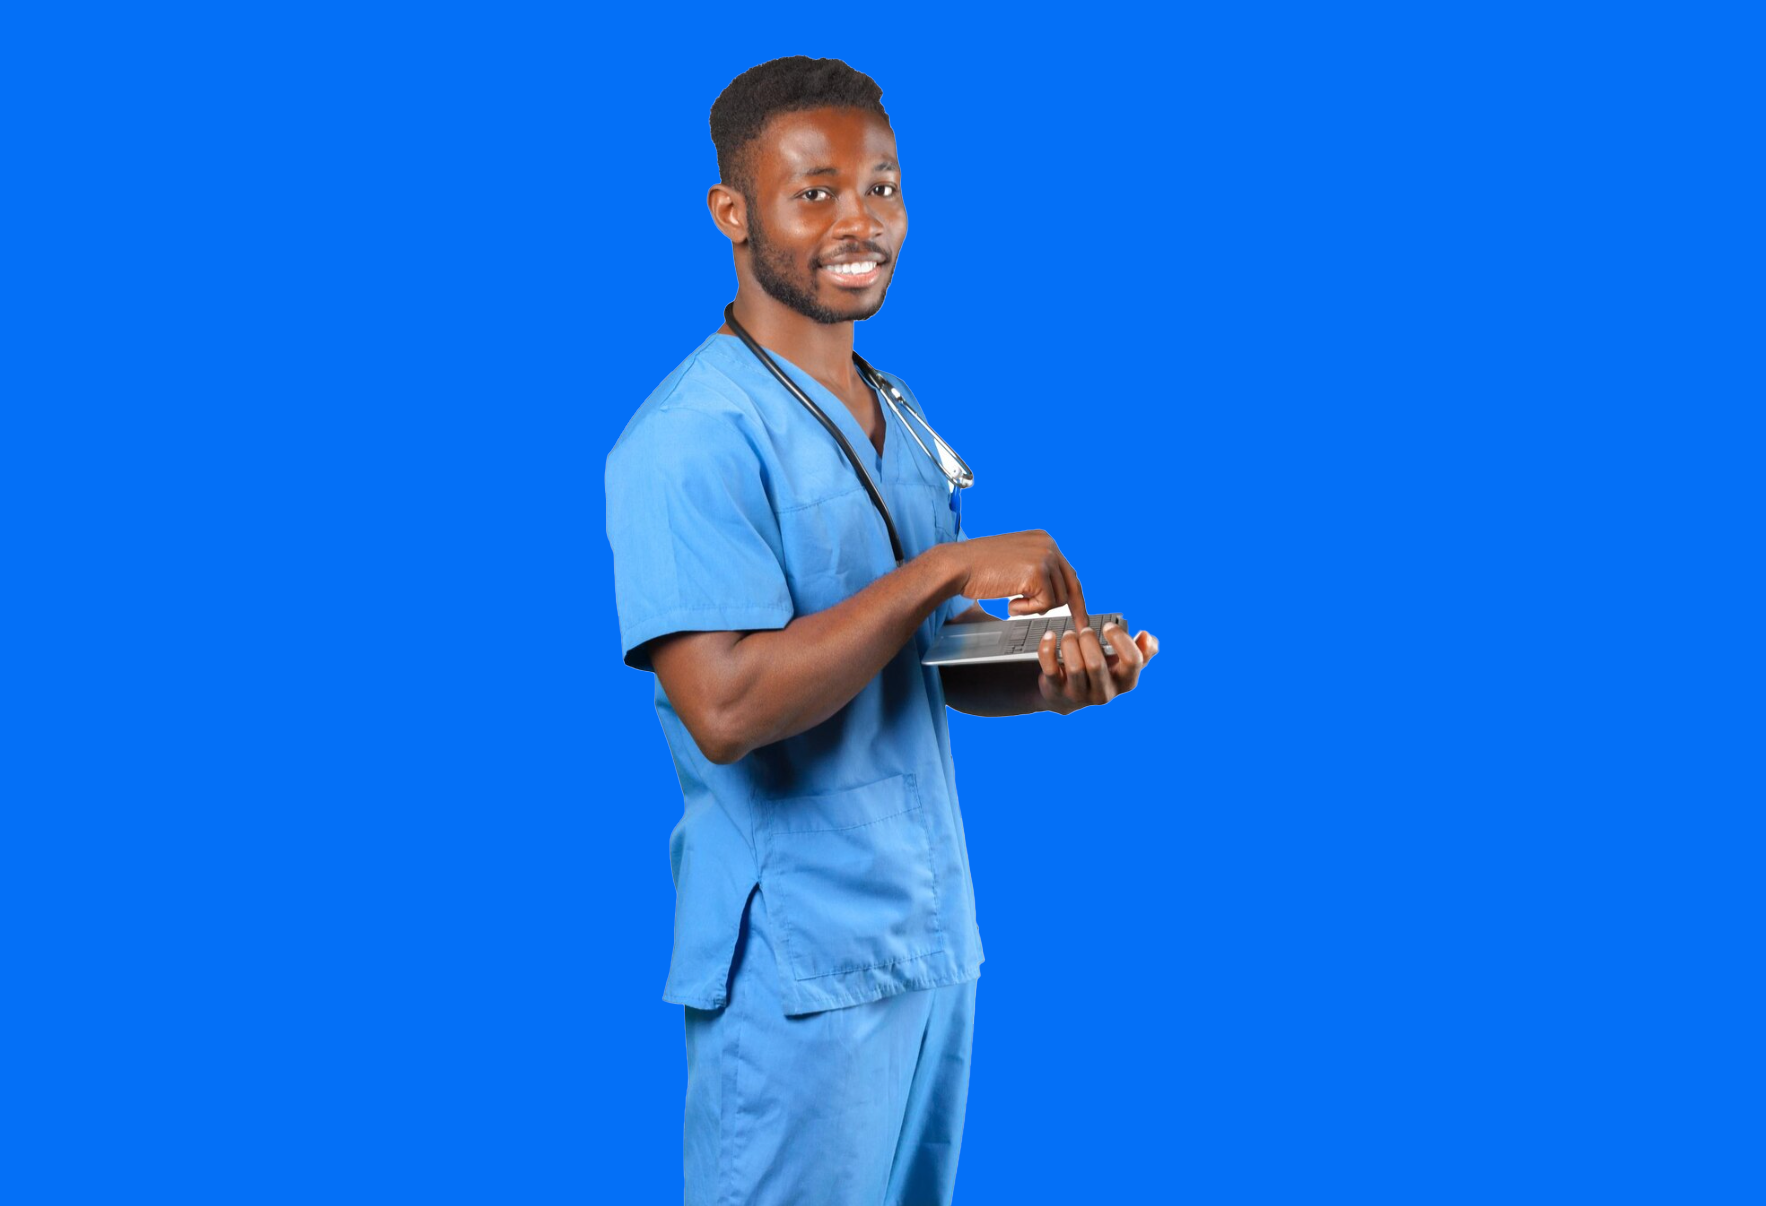 Staffing Solutions for Nurses and Healthcare Professionals – RNs, LPNs, CNAs, and More.